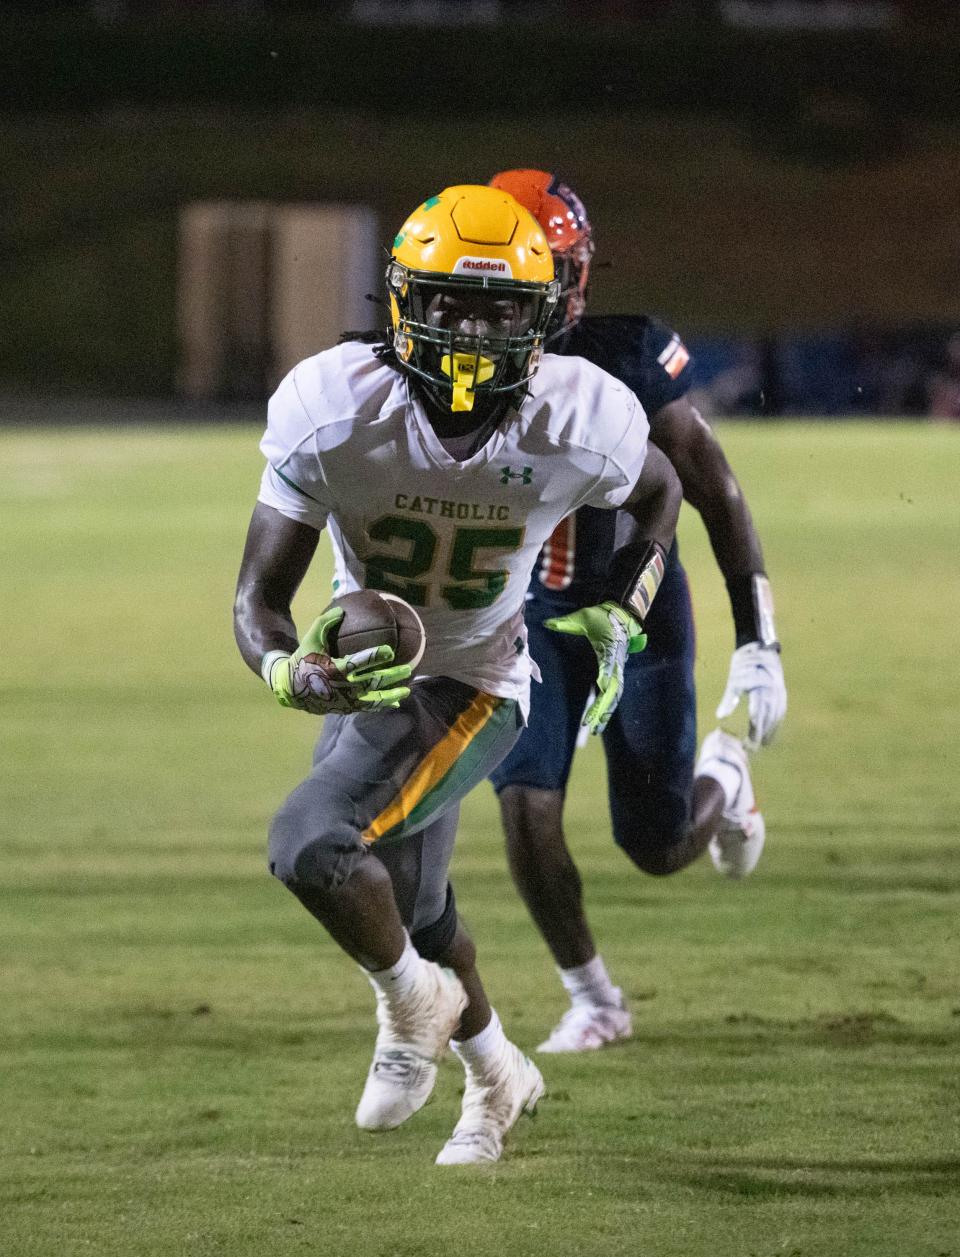 CJ Nettles (25) takes it in for a touchdown and a 12-0 Crusaders lead during the Pensacola Catholic vs Escambia football game at Escambia High School in Pensacola on Friday, Sept. 1, 2023.